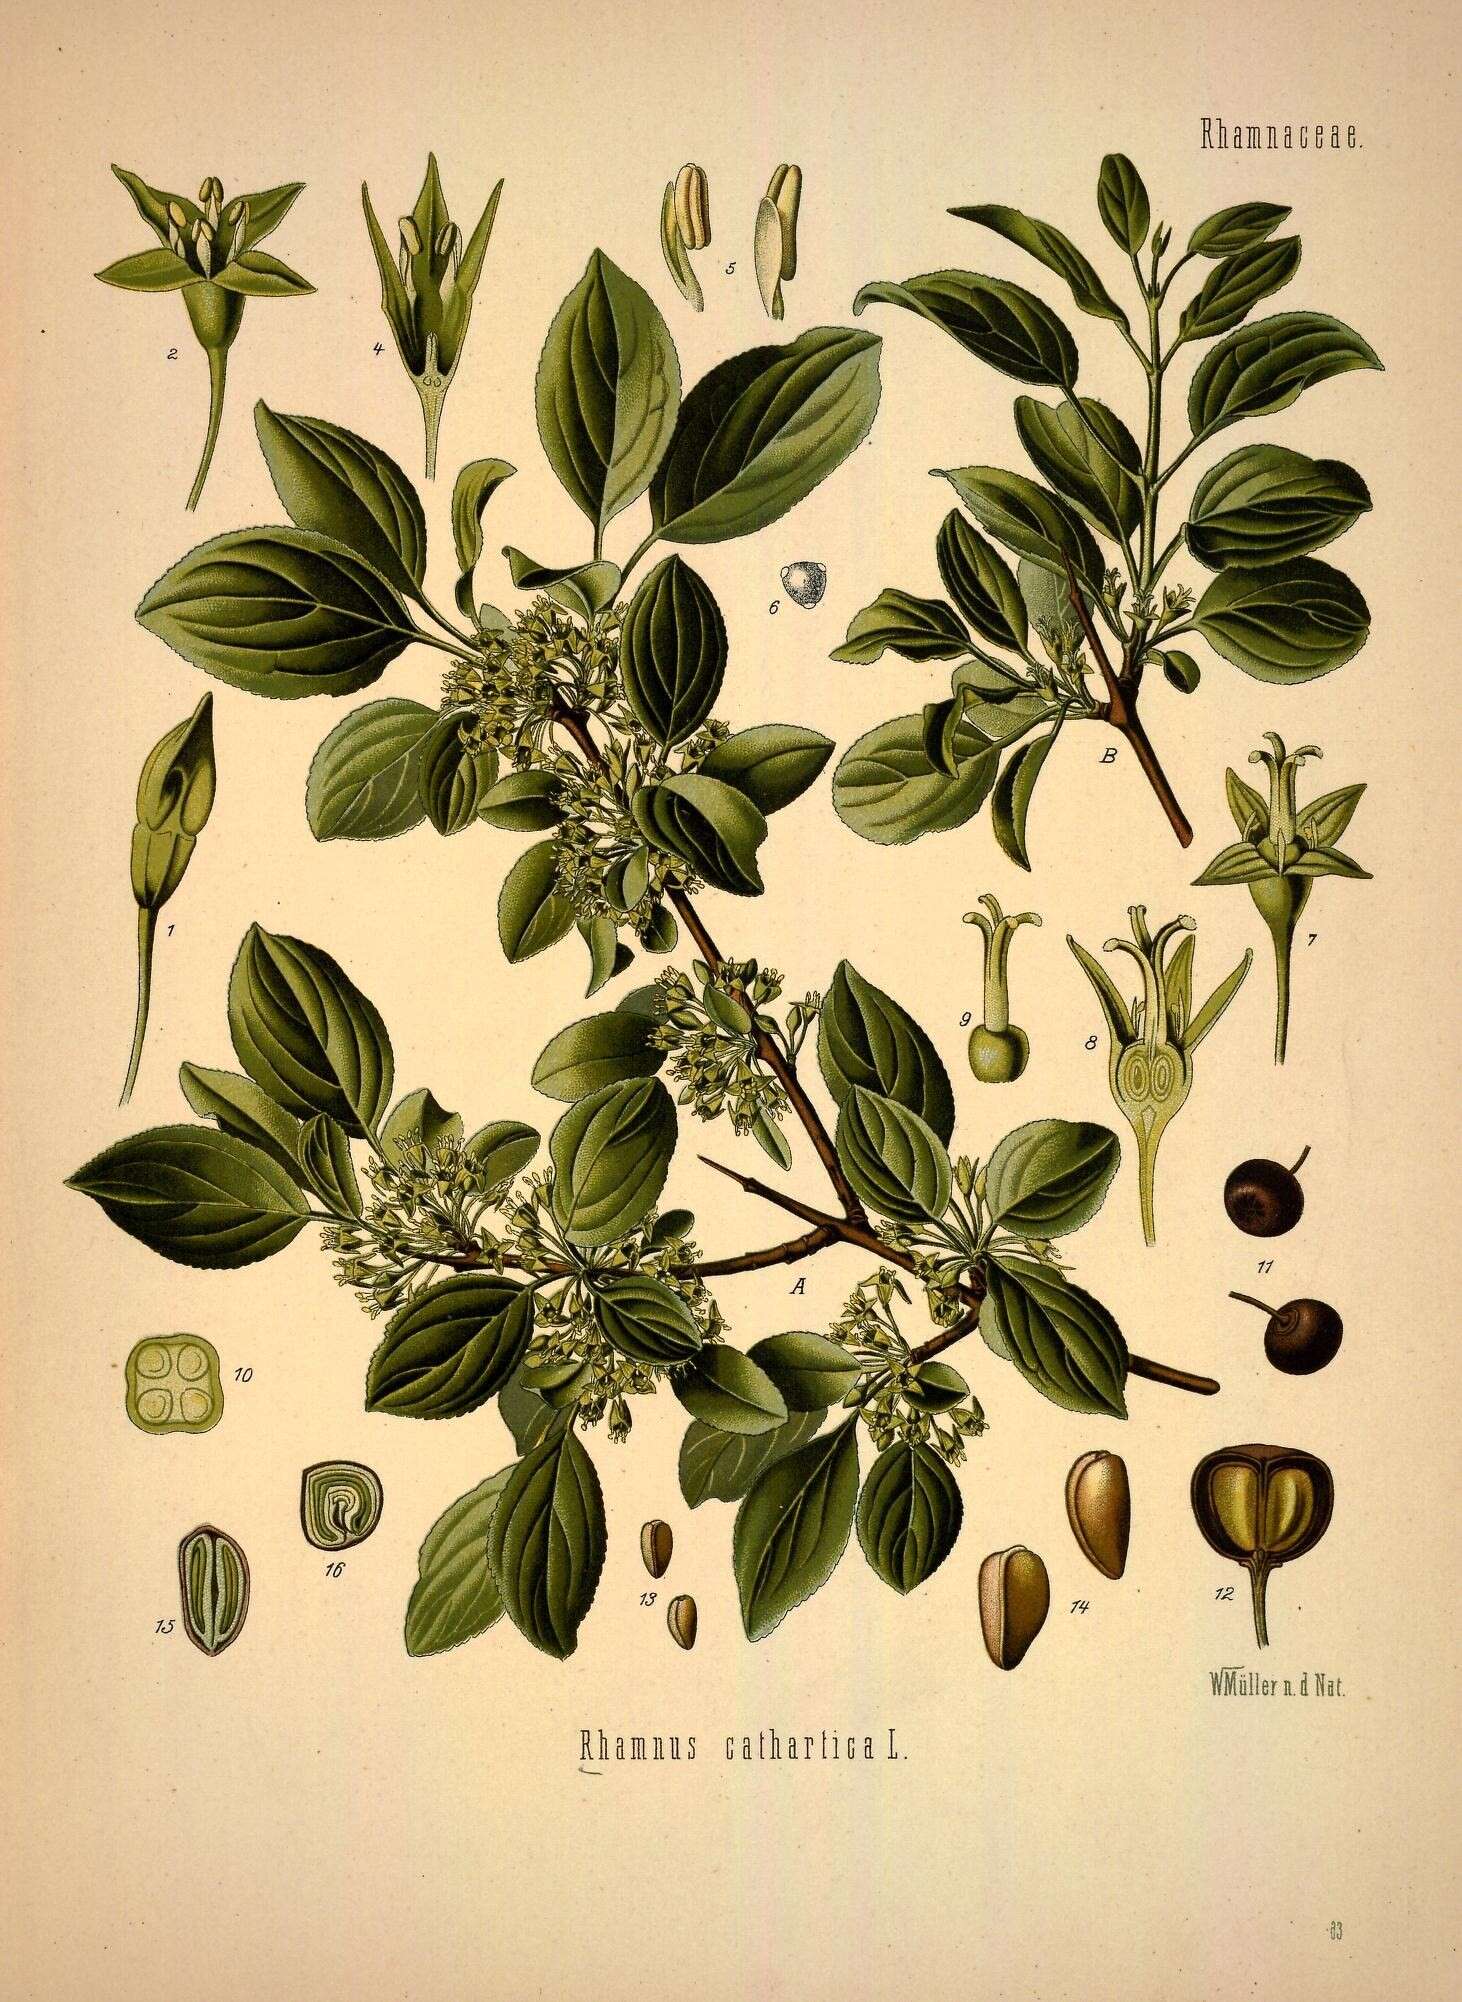 Image of buckthorn family